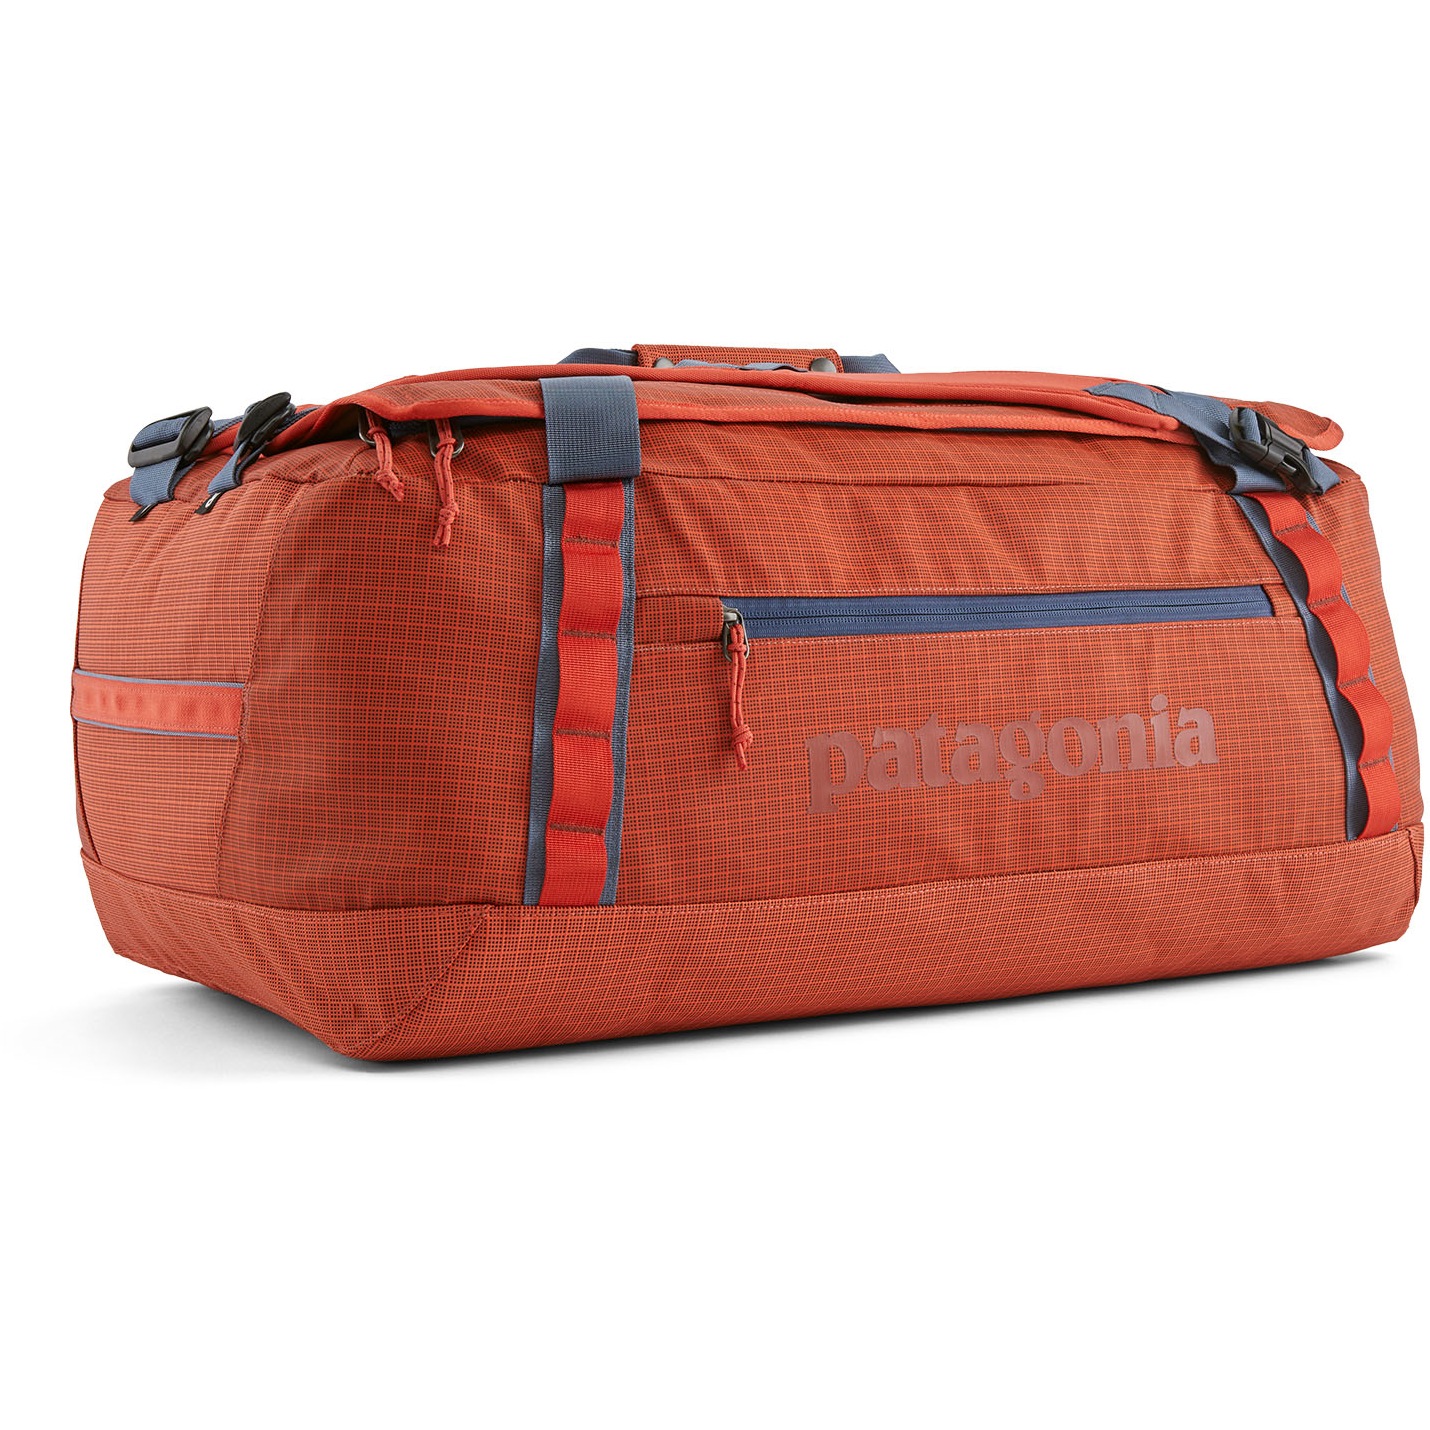 Picture of Patagonia Black Hole Duffel 55L - Pimento Red